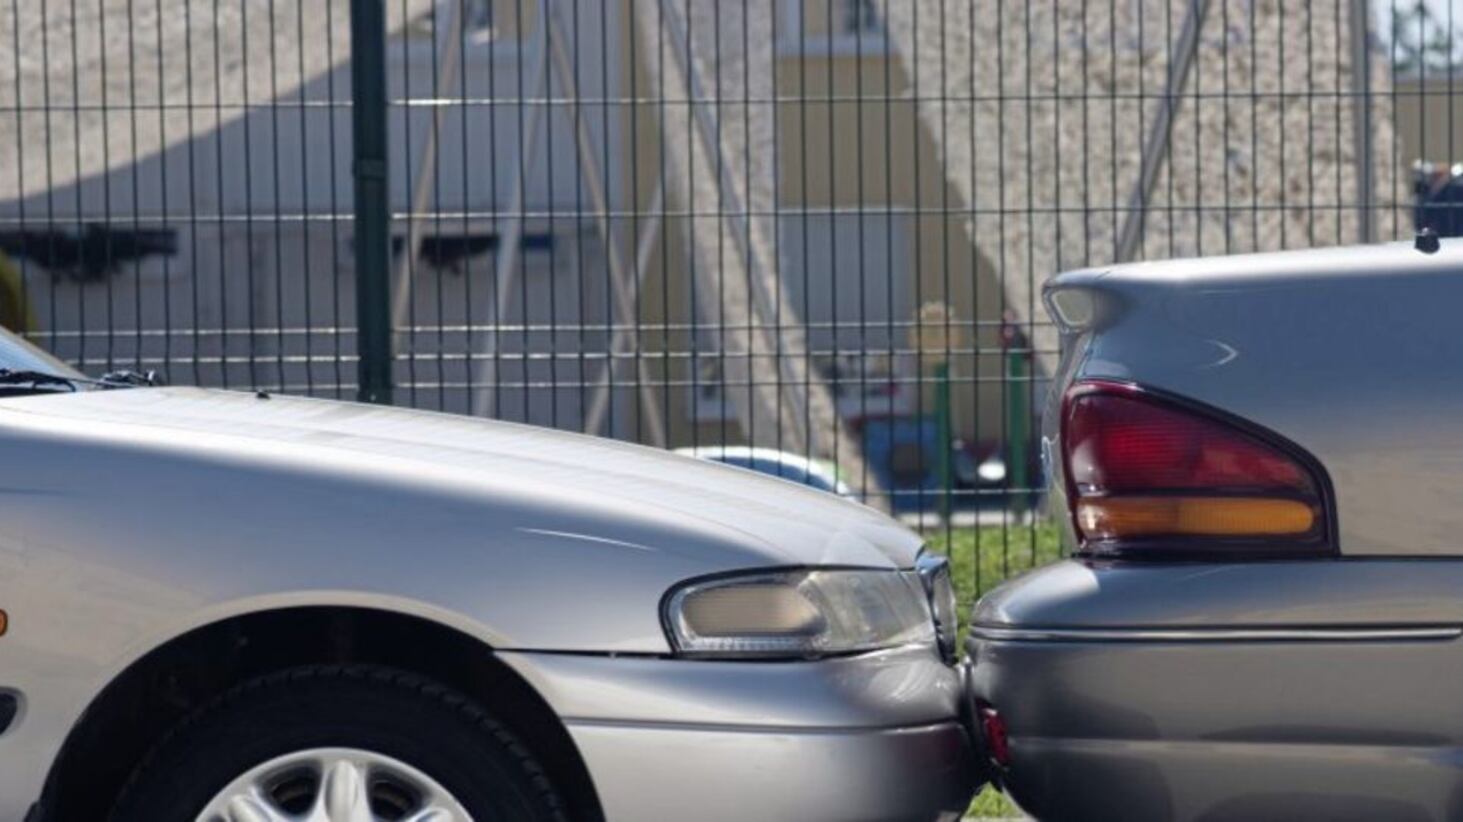 The age-old clich&eacute; that women can&#39;t park which has divided opinion between males and females for years 